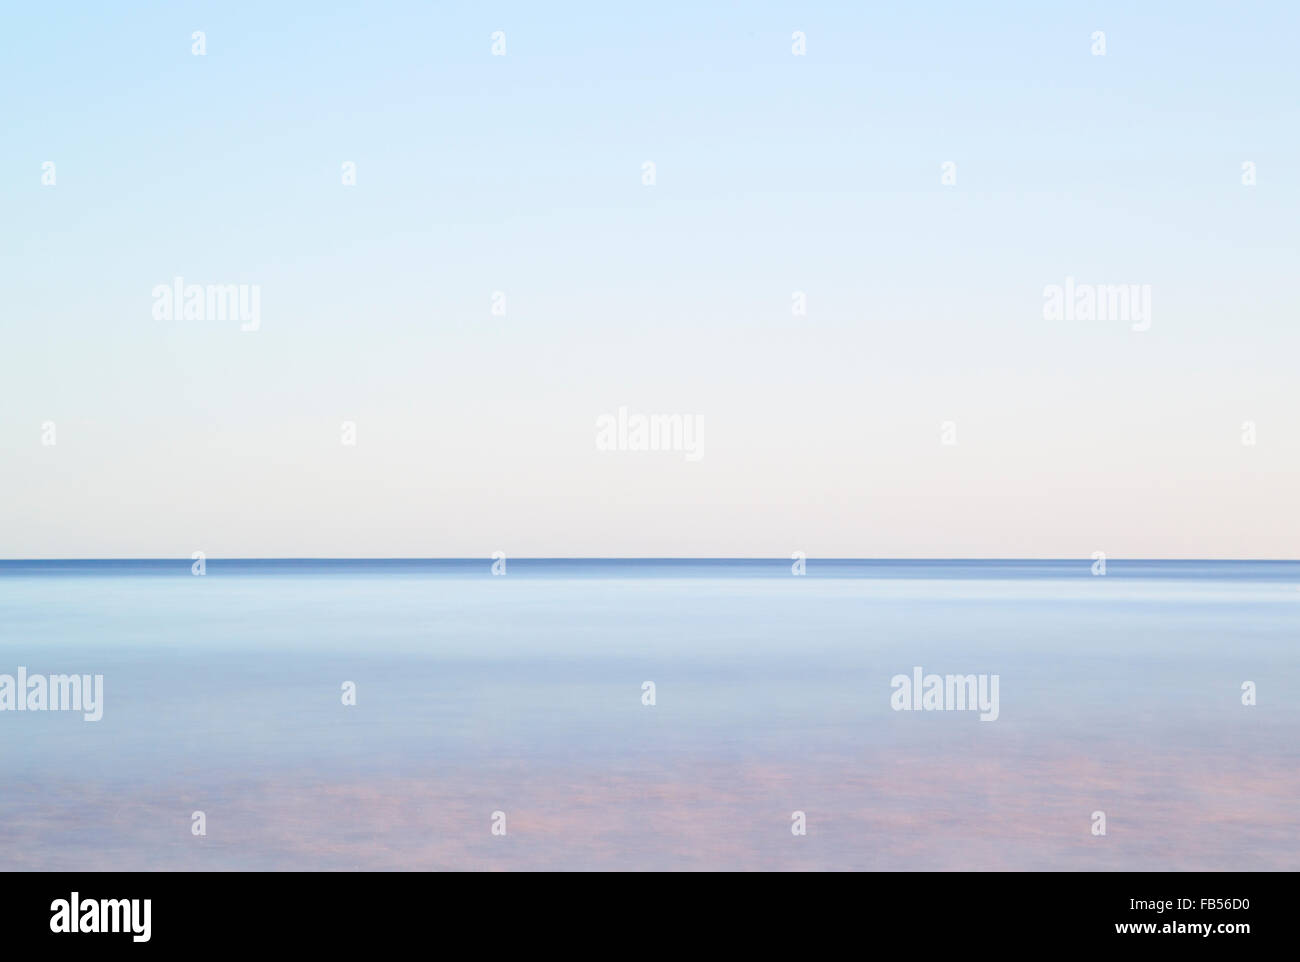 Simplified long exposure semi abstract view of waves over sandy beach concepts peaceful calm horizon distant future Stock Photo